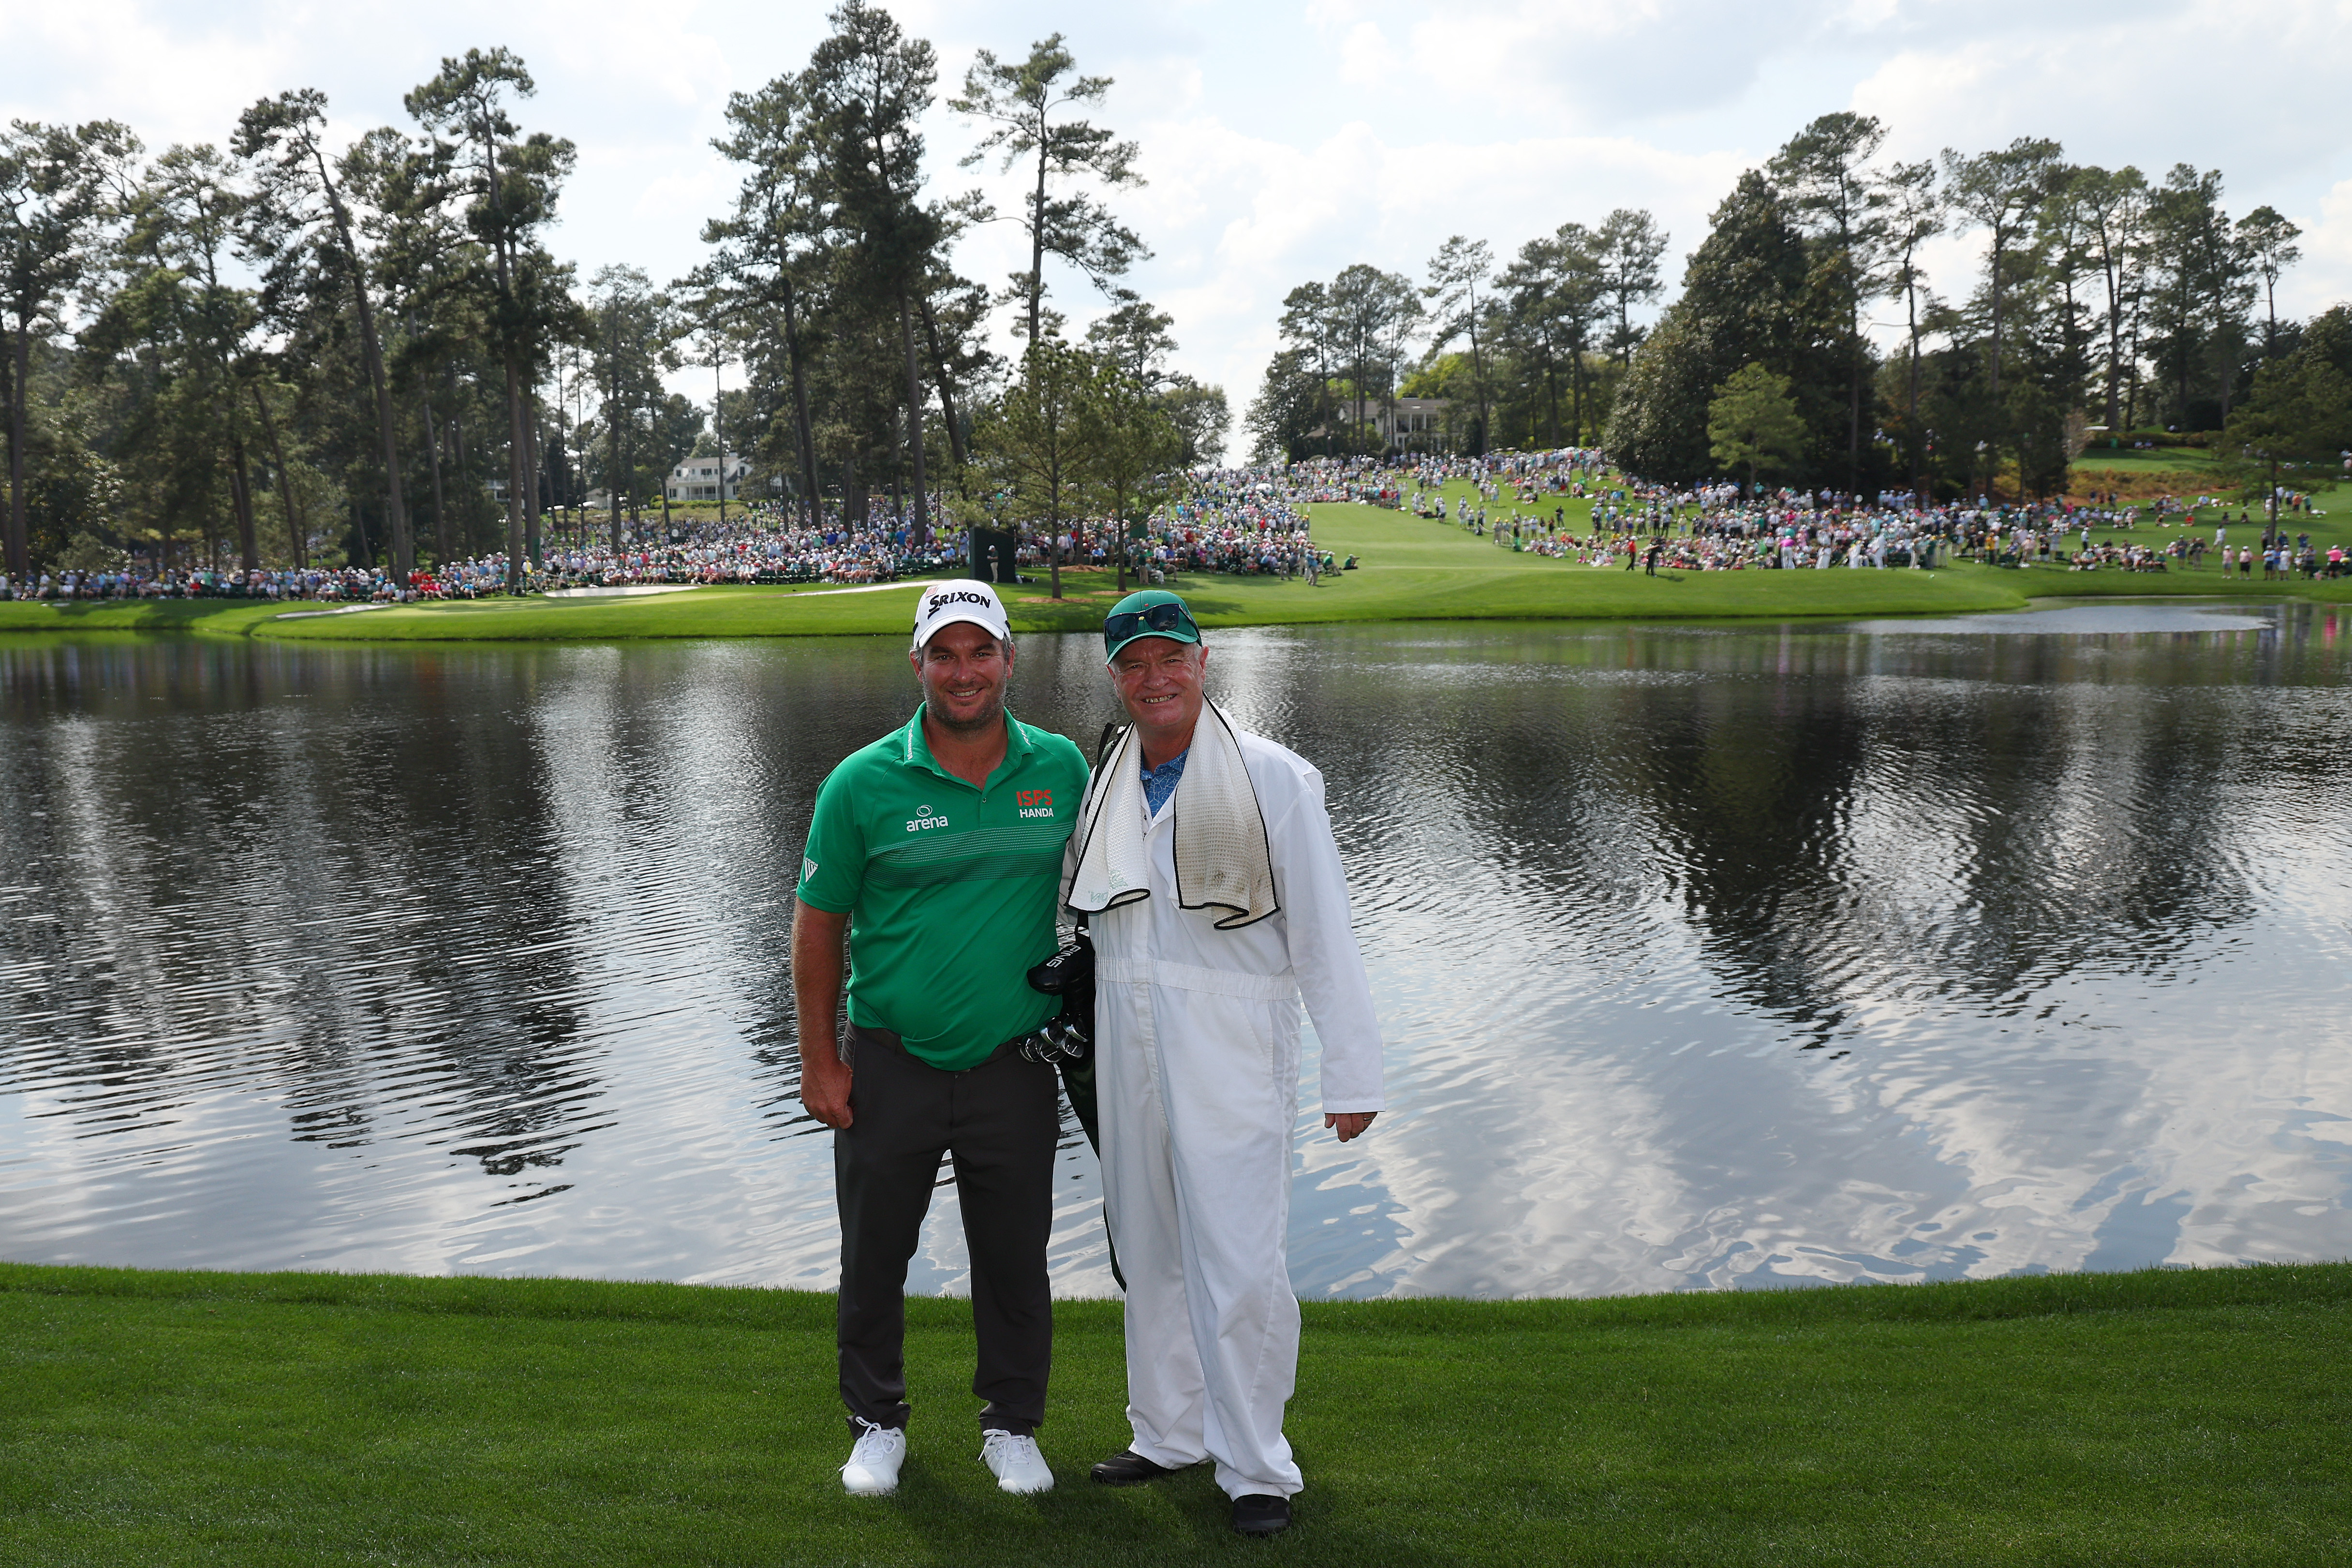 The 2023 Masters Tournament 2023 Odds: Cameron Smith